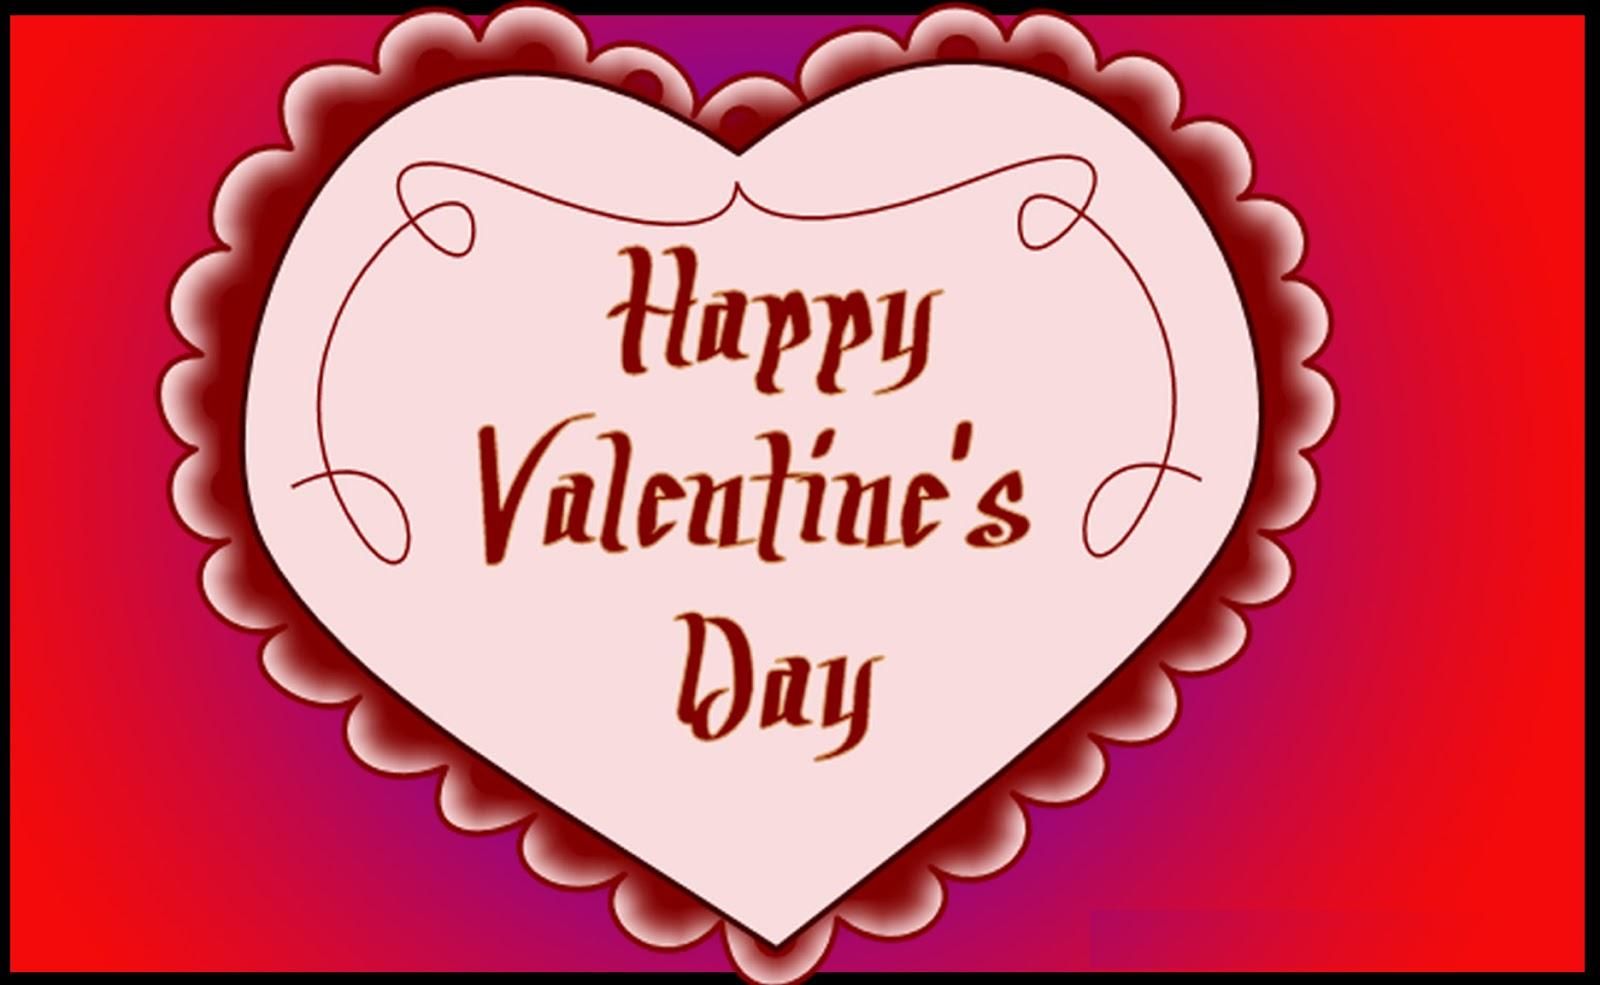 Advance 14 Feb Happy Valentines Day Whatsapp Dp Images Wallpapers